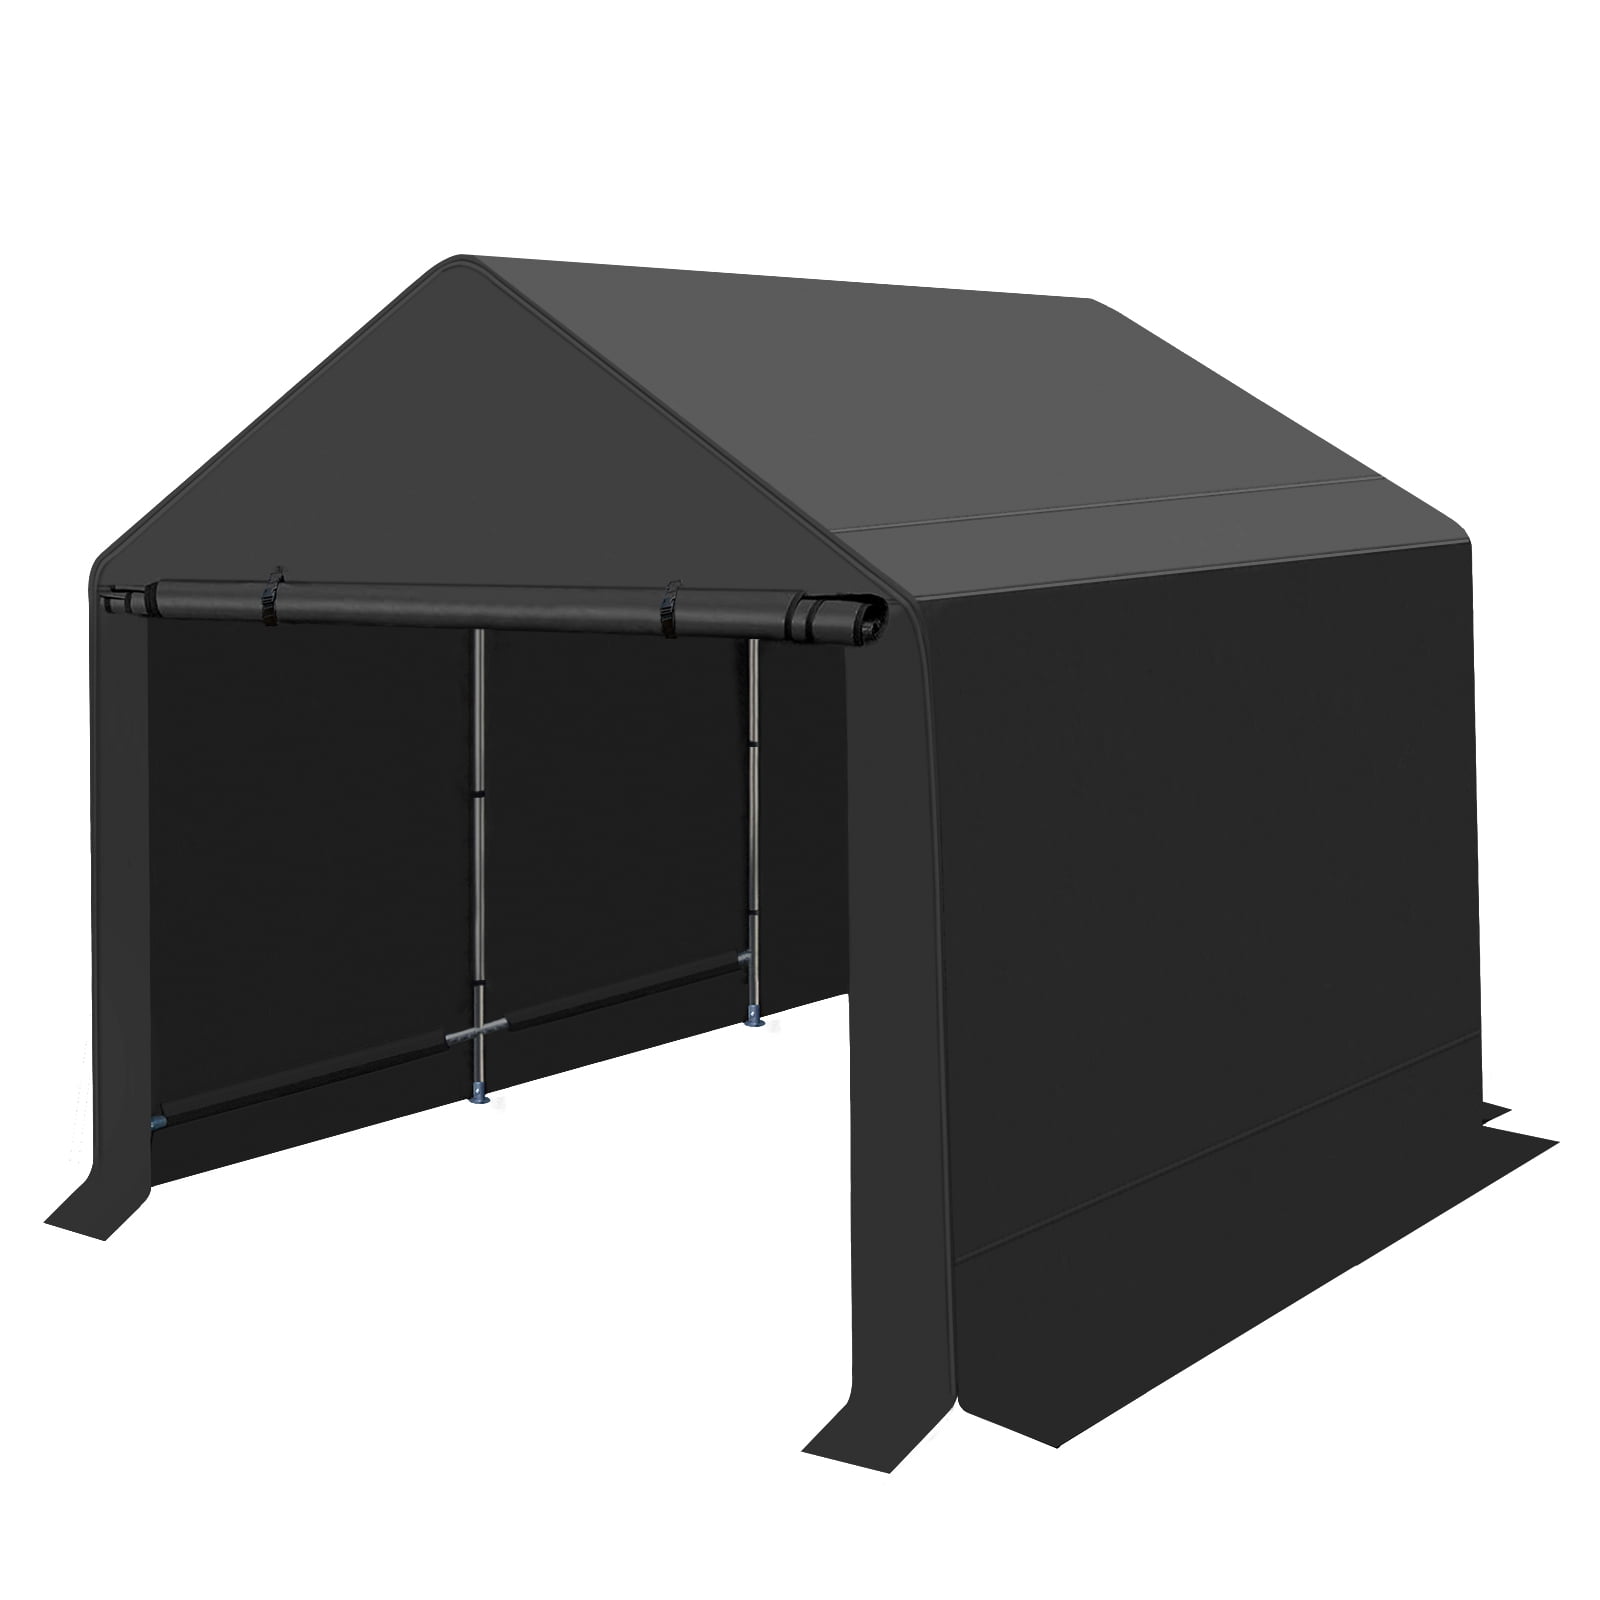 regel Martin Luther King Junior staart Outdoor Canopy Storage Shed, 10x10 ft All-season Shelter Logic Portable  Garage Anti-UV Windproof Tent w/ Steel Frame, 2 Rollup Zipper Doors&Vent  for Patio, Lawn can Store Motorcycle, Garden Tools - Walmart.com